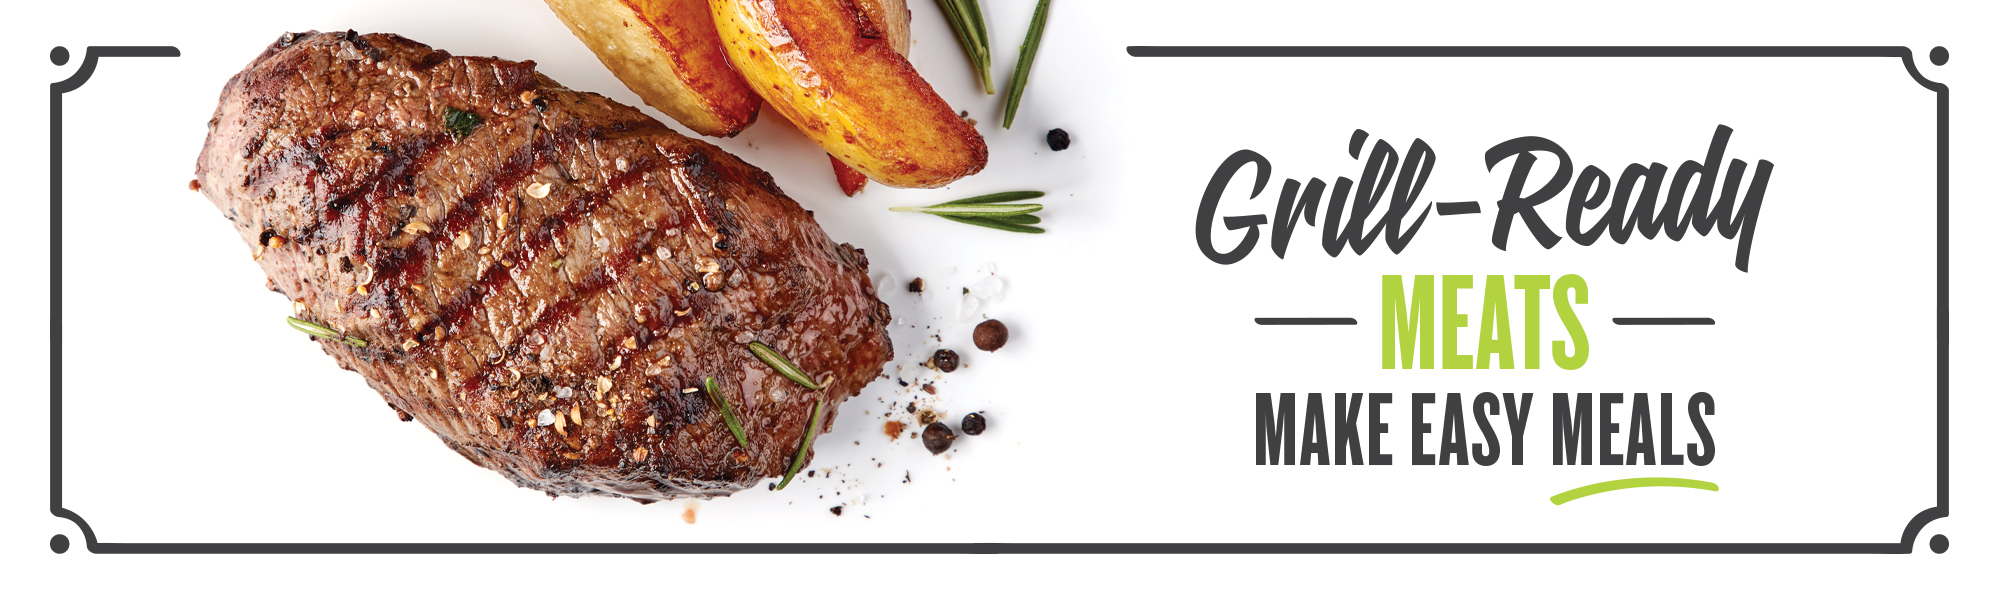 Grill-ready meats make easy meals!